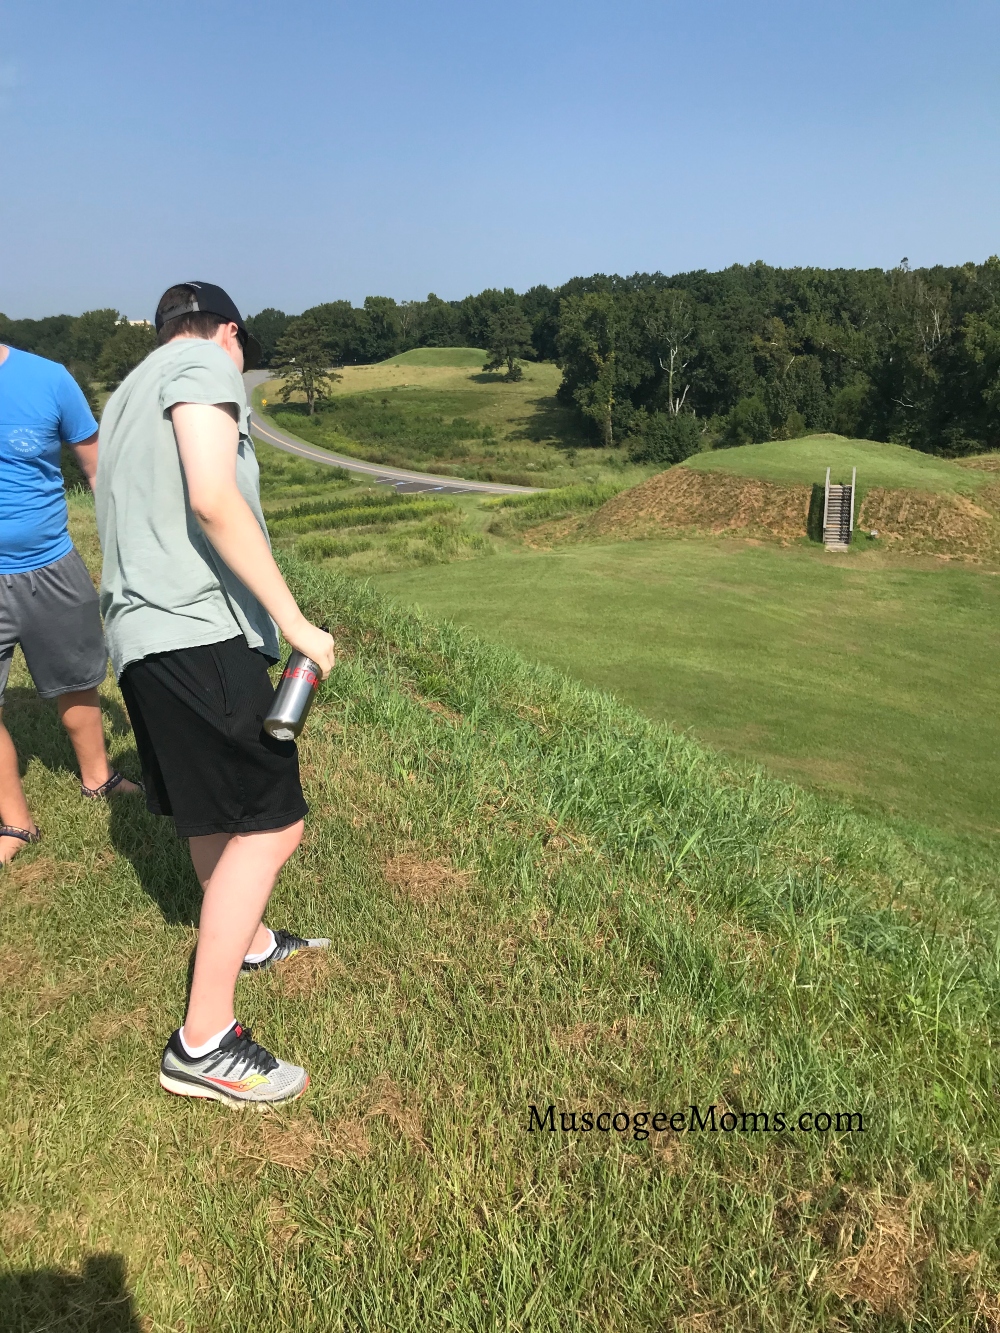 Ocmulgee Mounds National Historic Site